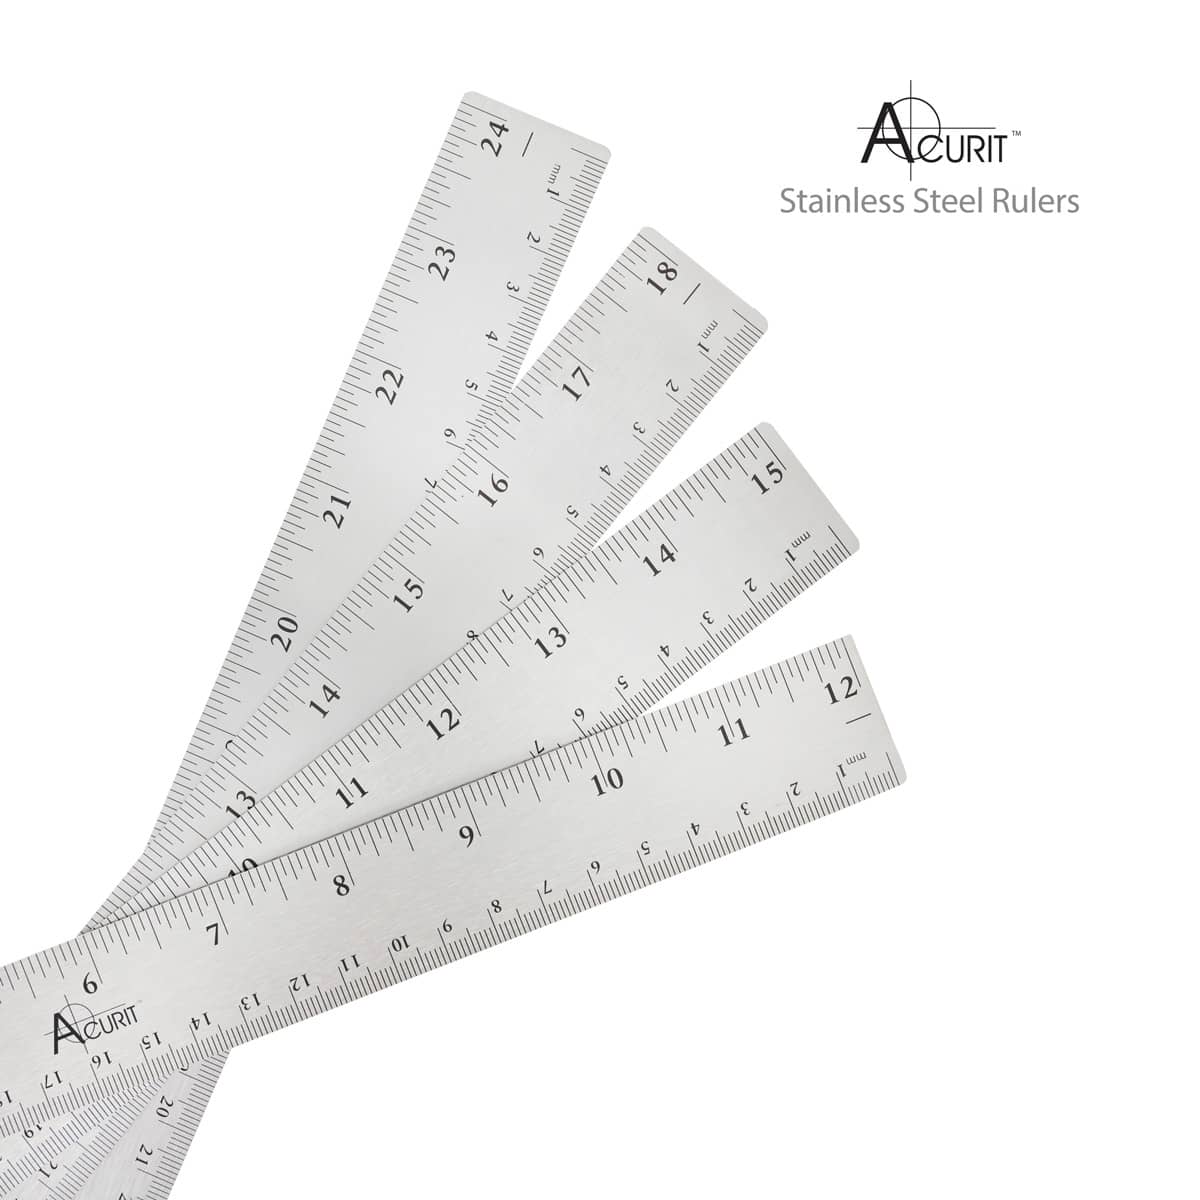 Acurit Stainless Steel Ruler